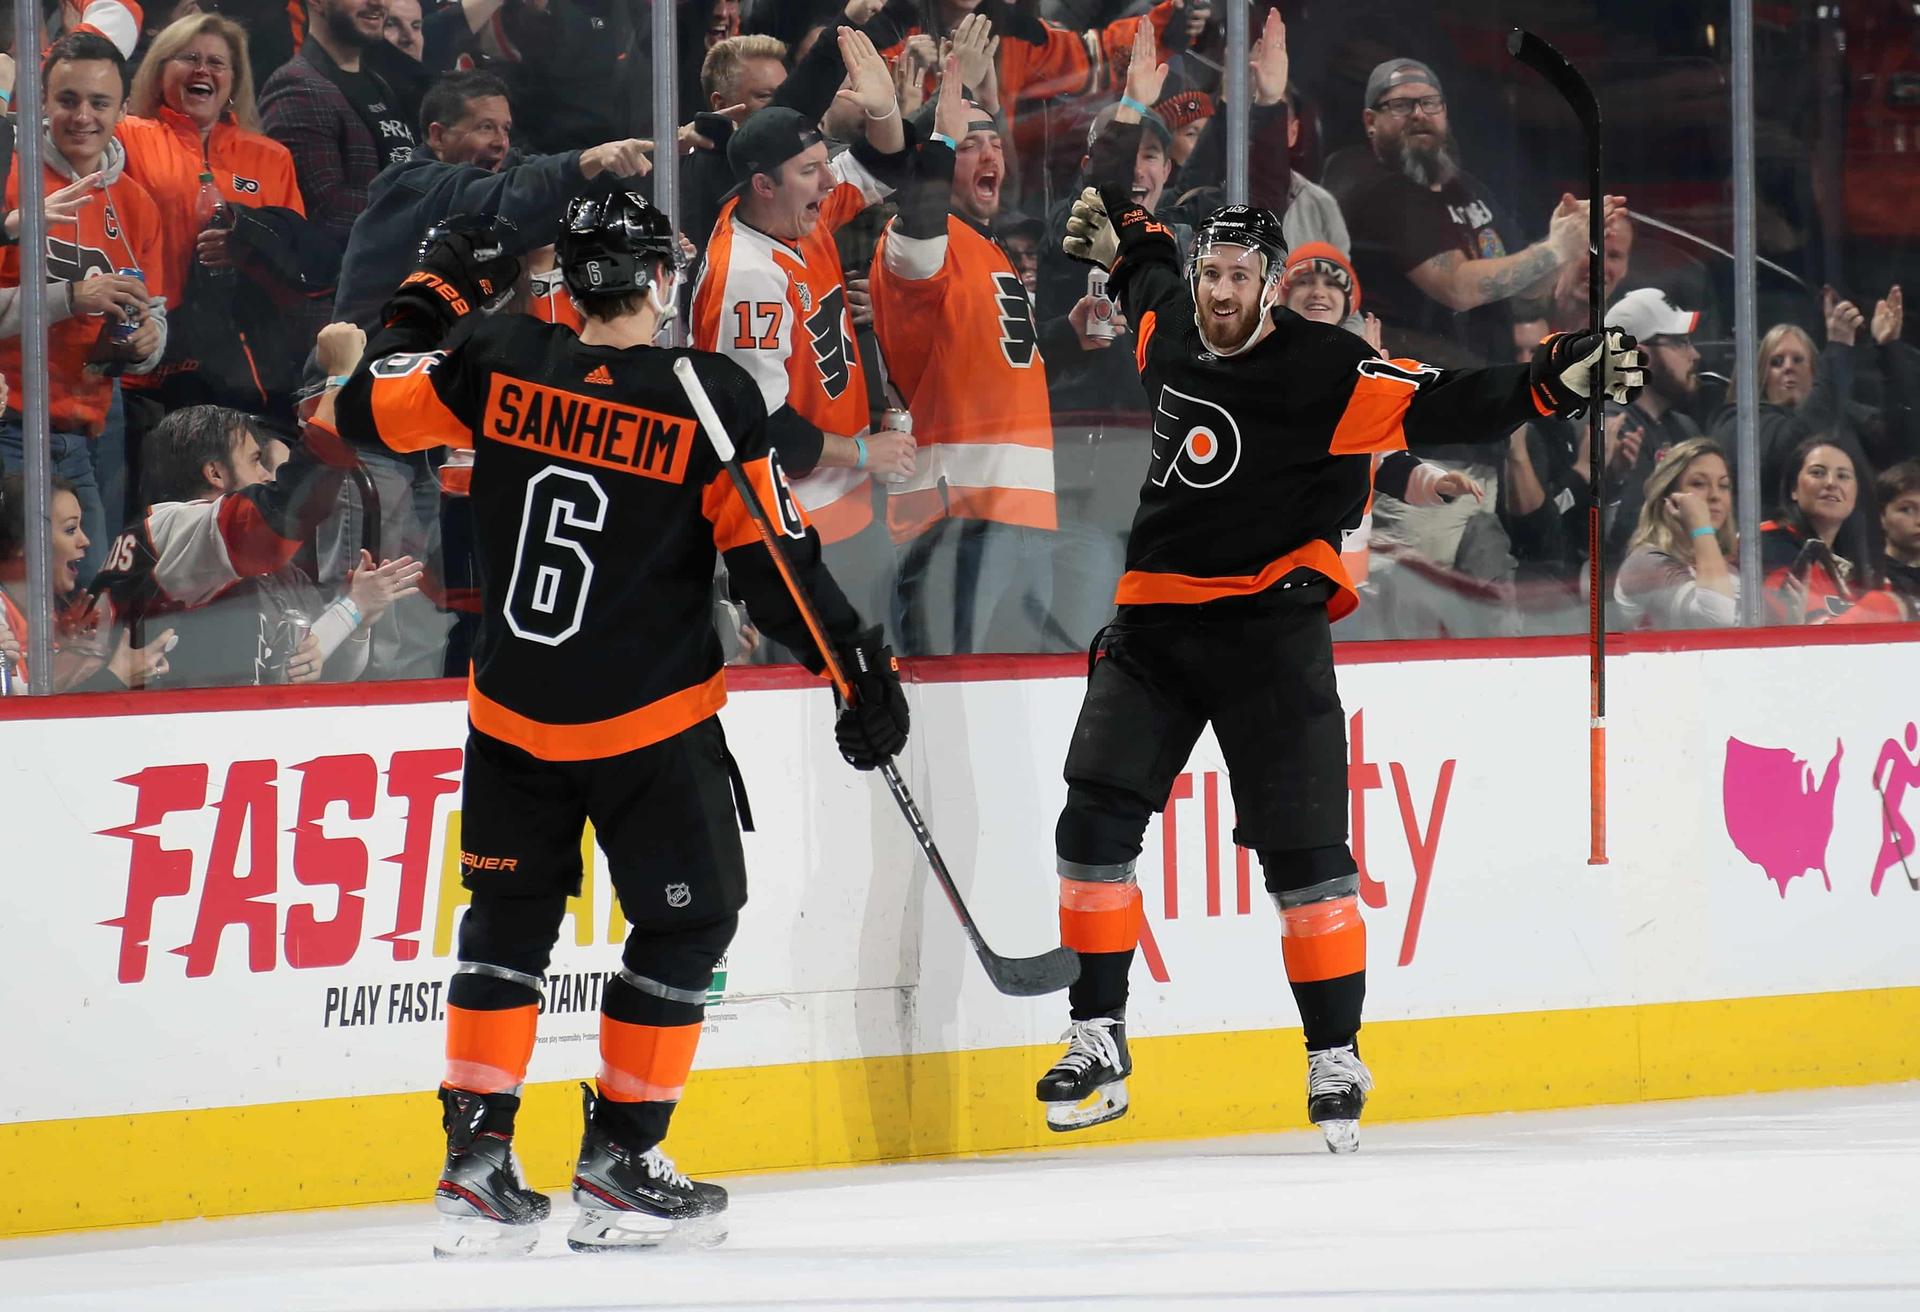 10 things: With successful back-to-back vs. Penguins and Avs, Flyers carry pre-bye week surge into second half